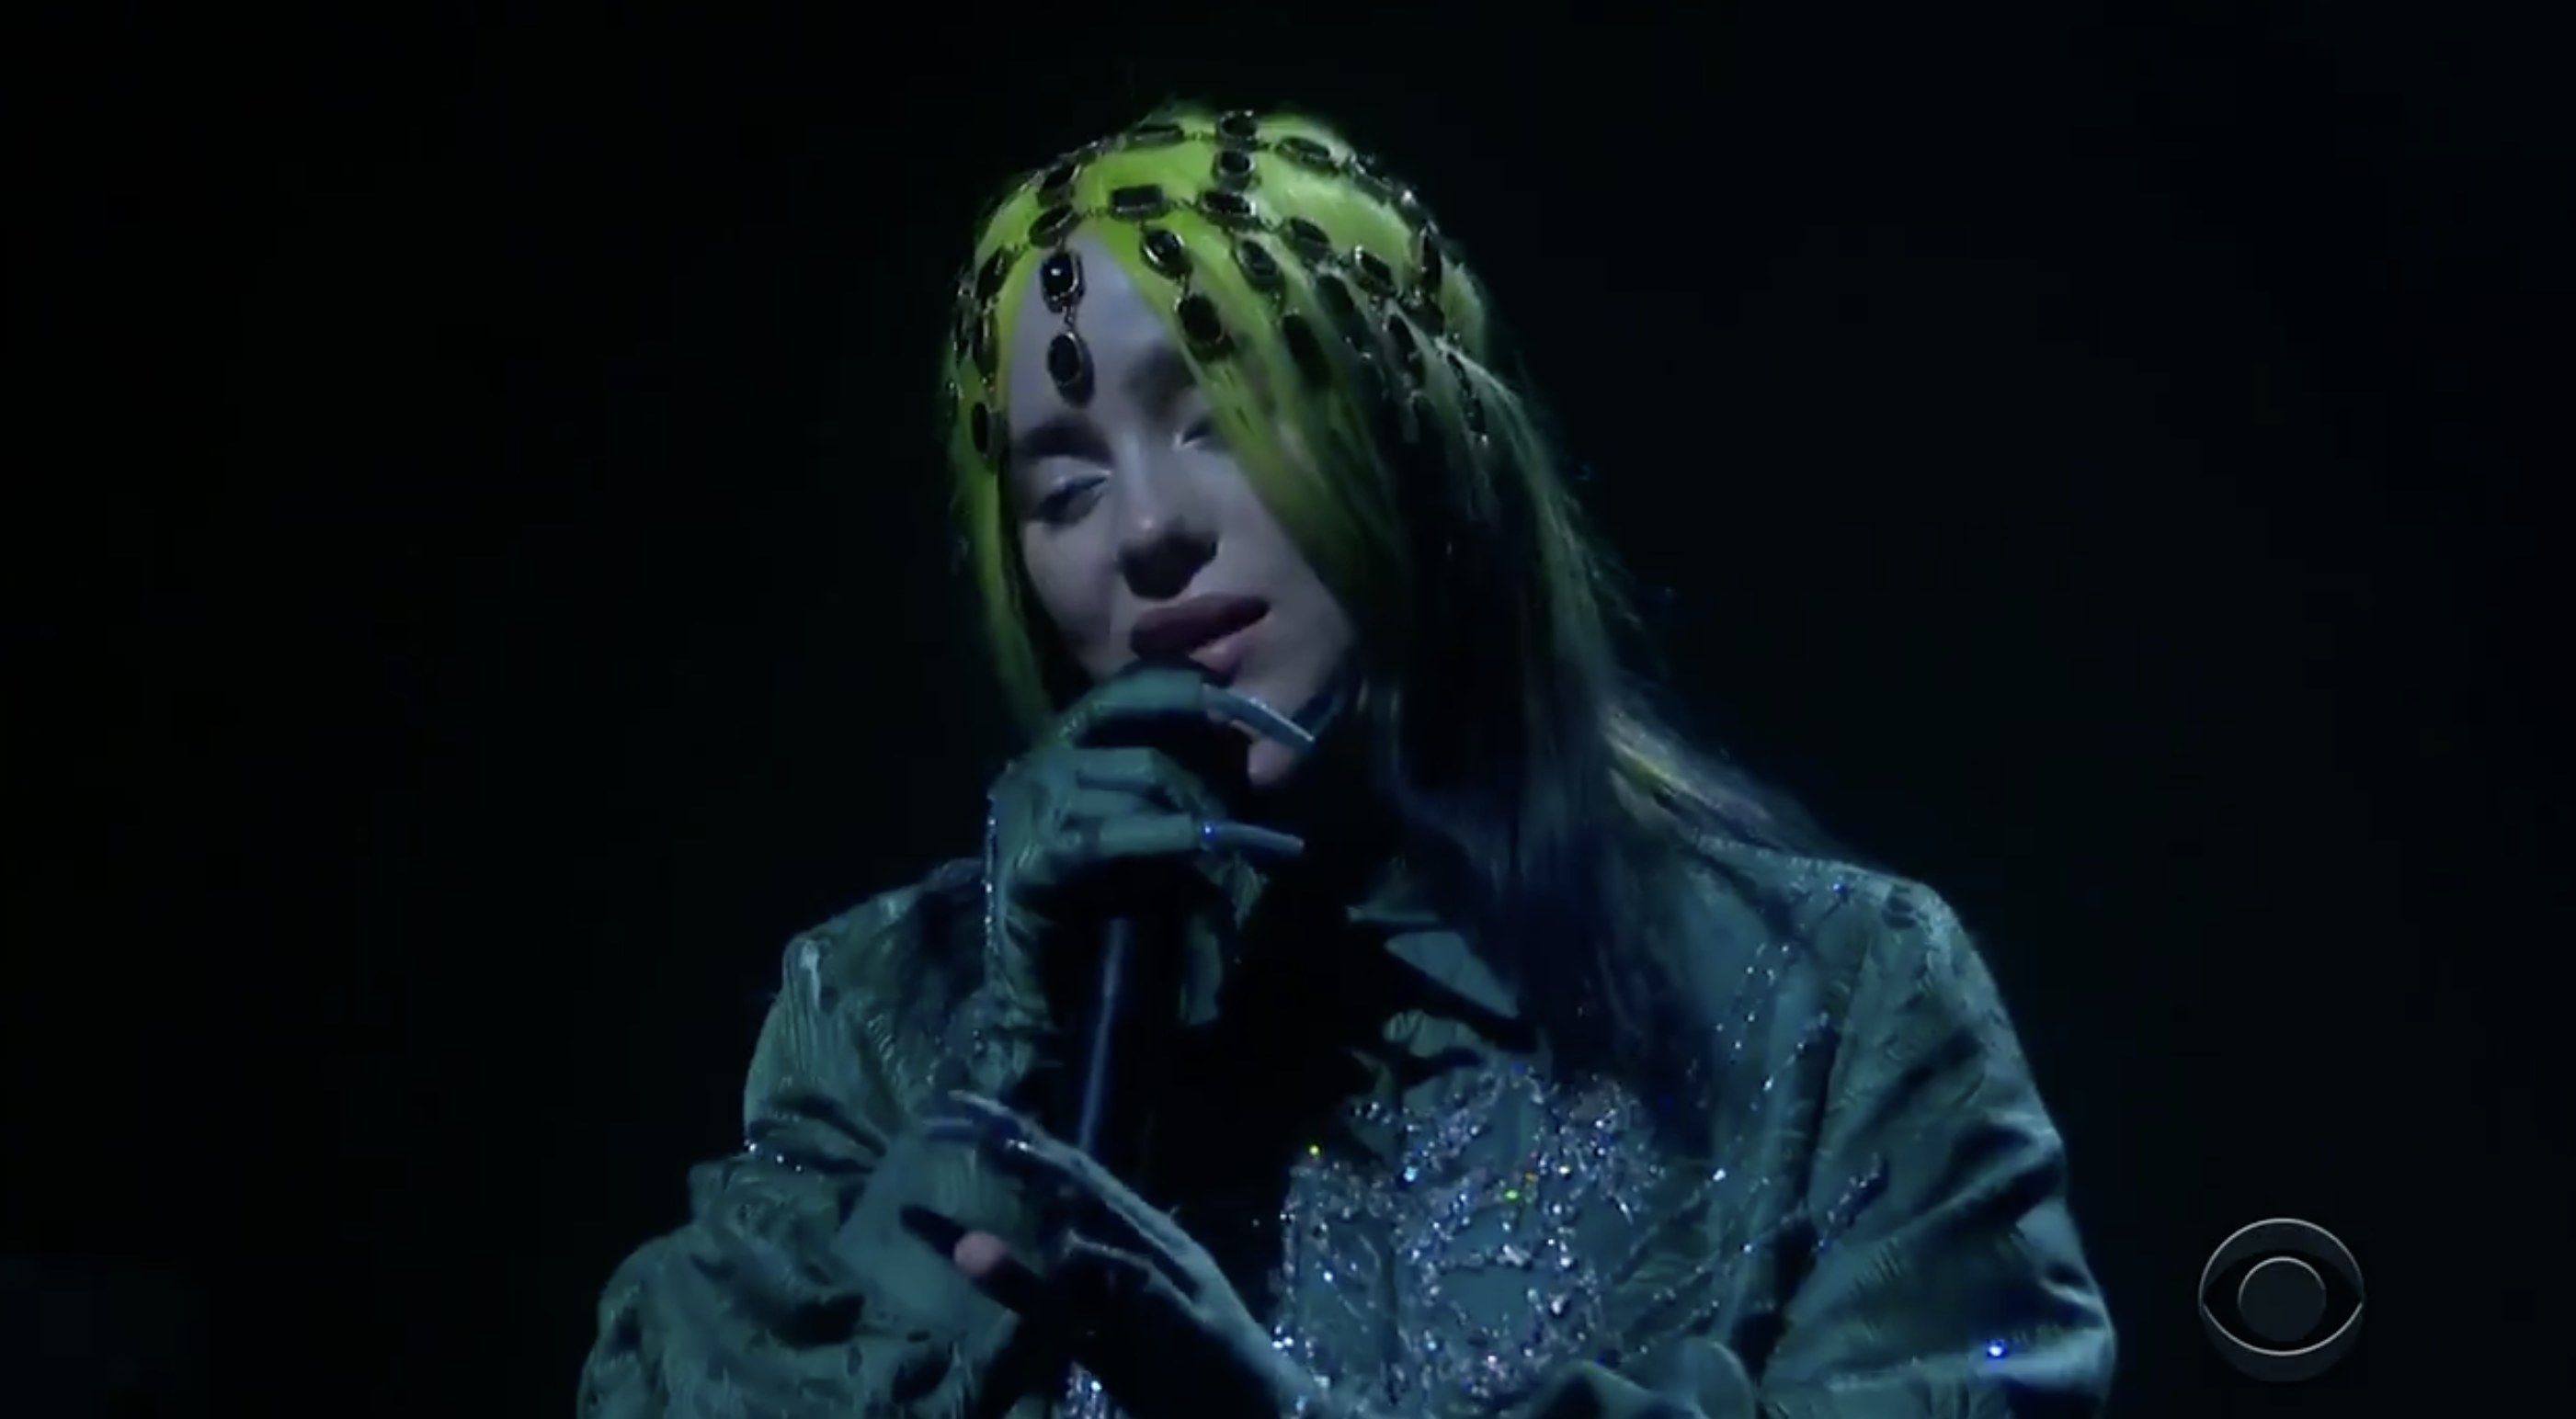 Billie wears a sparkling green jacket and jeweled head piece